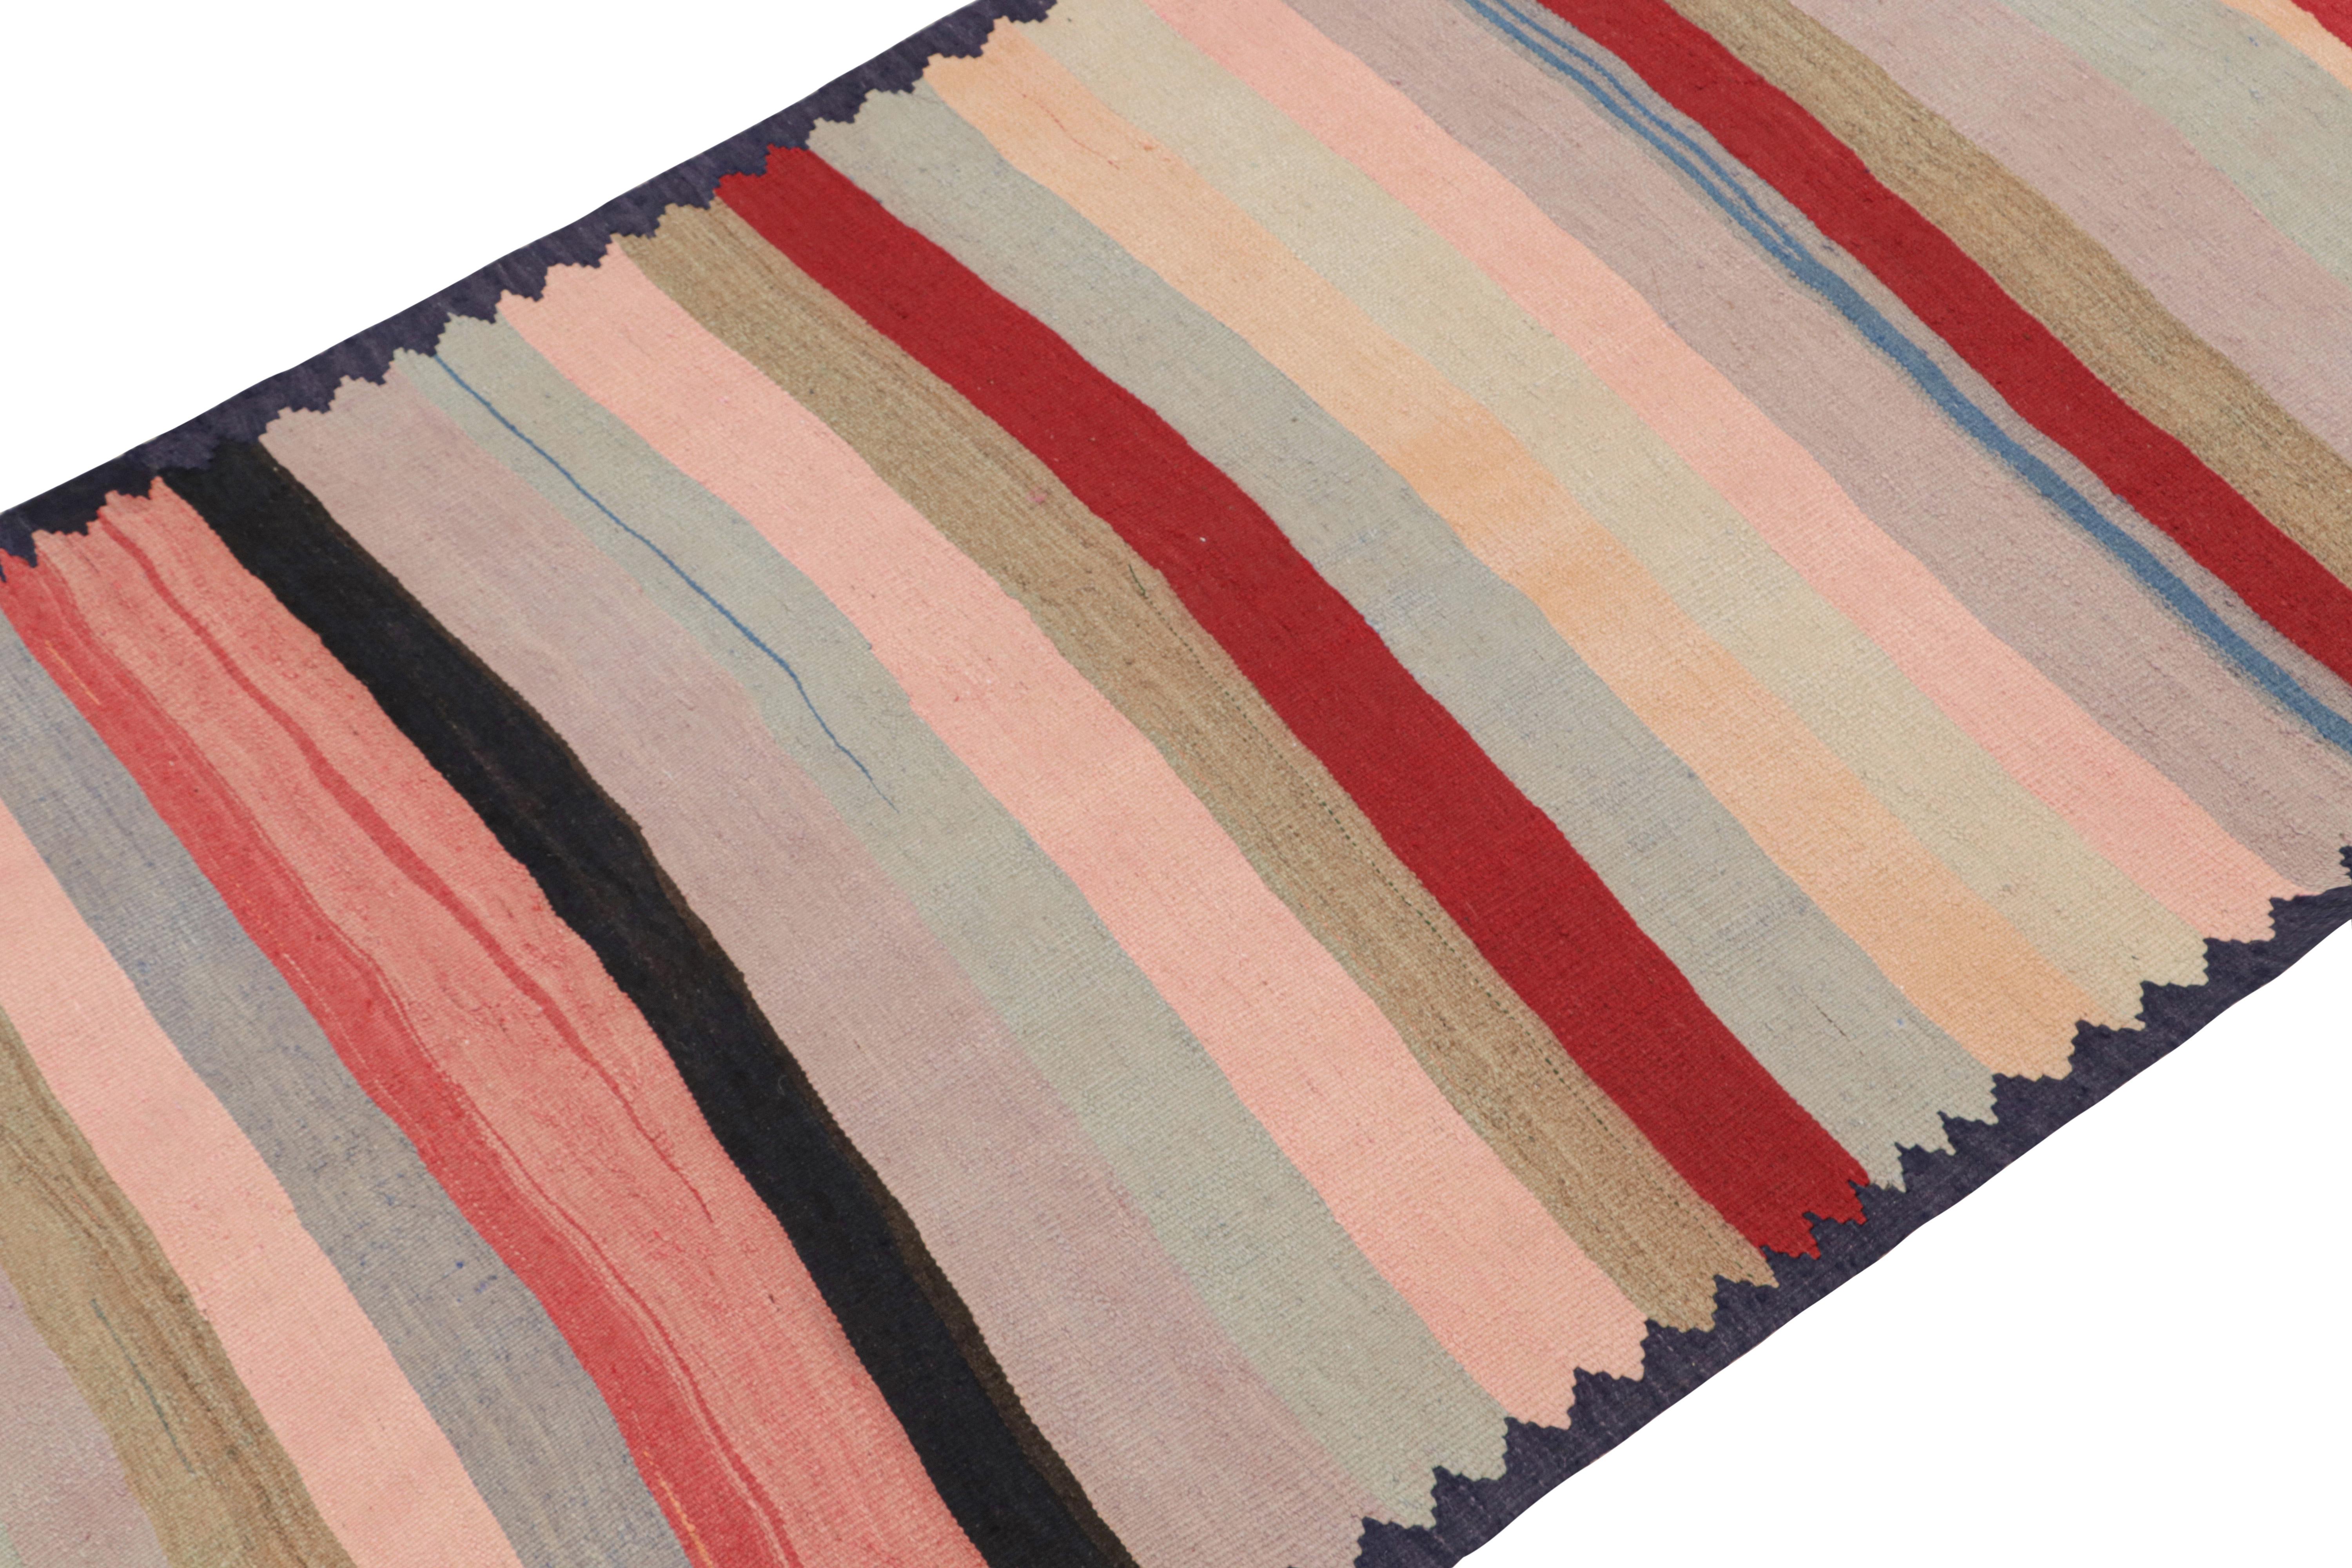 This vintage 4x10 Shahsavan Persian Kilim is handwoven in wool, and originates circa 1950-1960.

On the Design: 

This piece enjoys geometric & striped patterns in red, brown, blue, pink & black - exemplifying tribal aesthetics of the Shahsavan